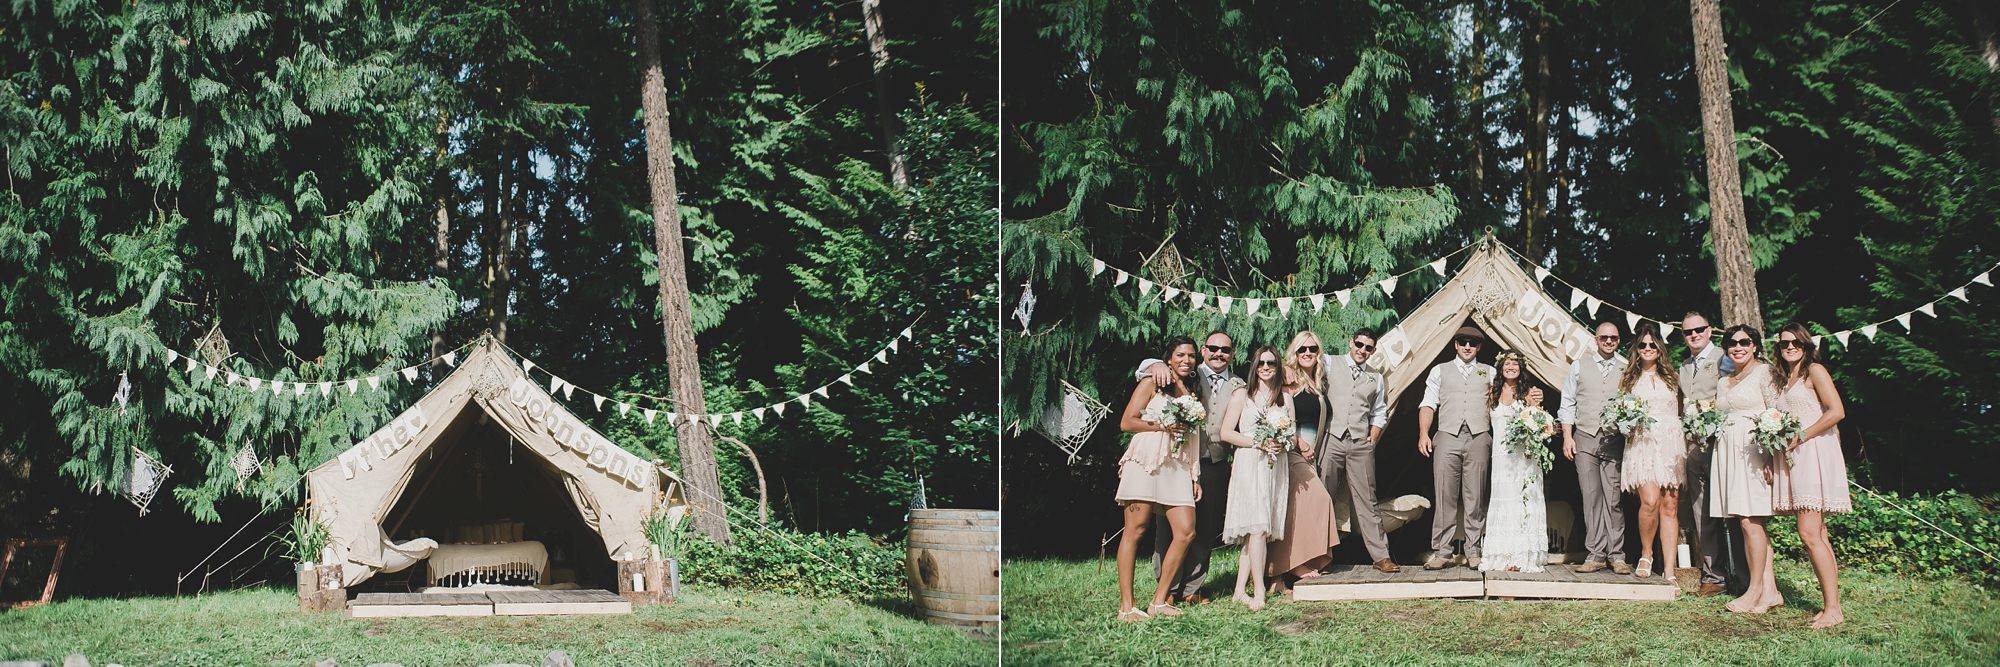 boho-forest-wedding-bridal-party-rustic-tent